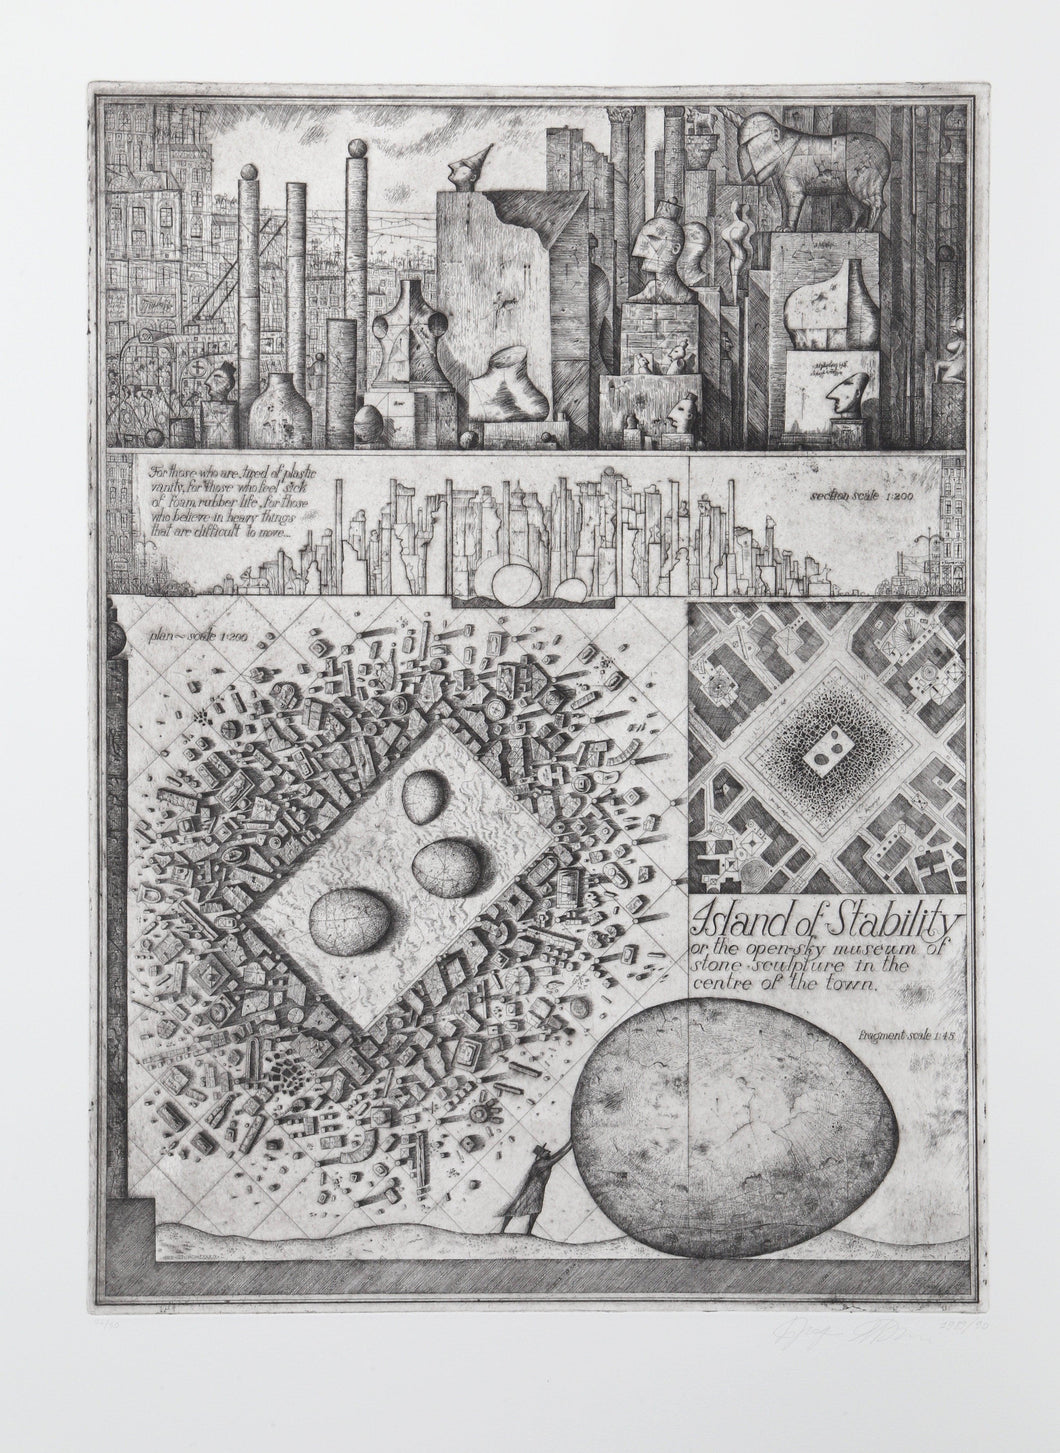 Island of Stability from Brodsky and Utkin: Projects 1981 - 1990 Etching | Alexander Brodsky and Ilya Utkin,{{product.type}}